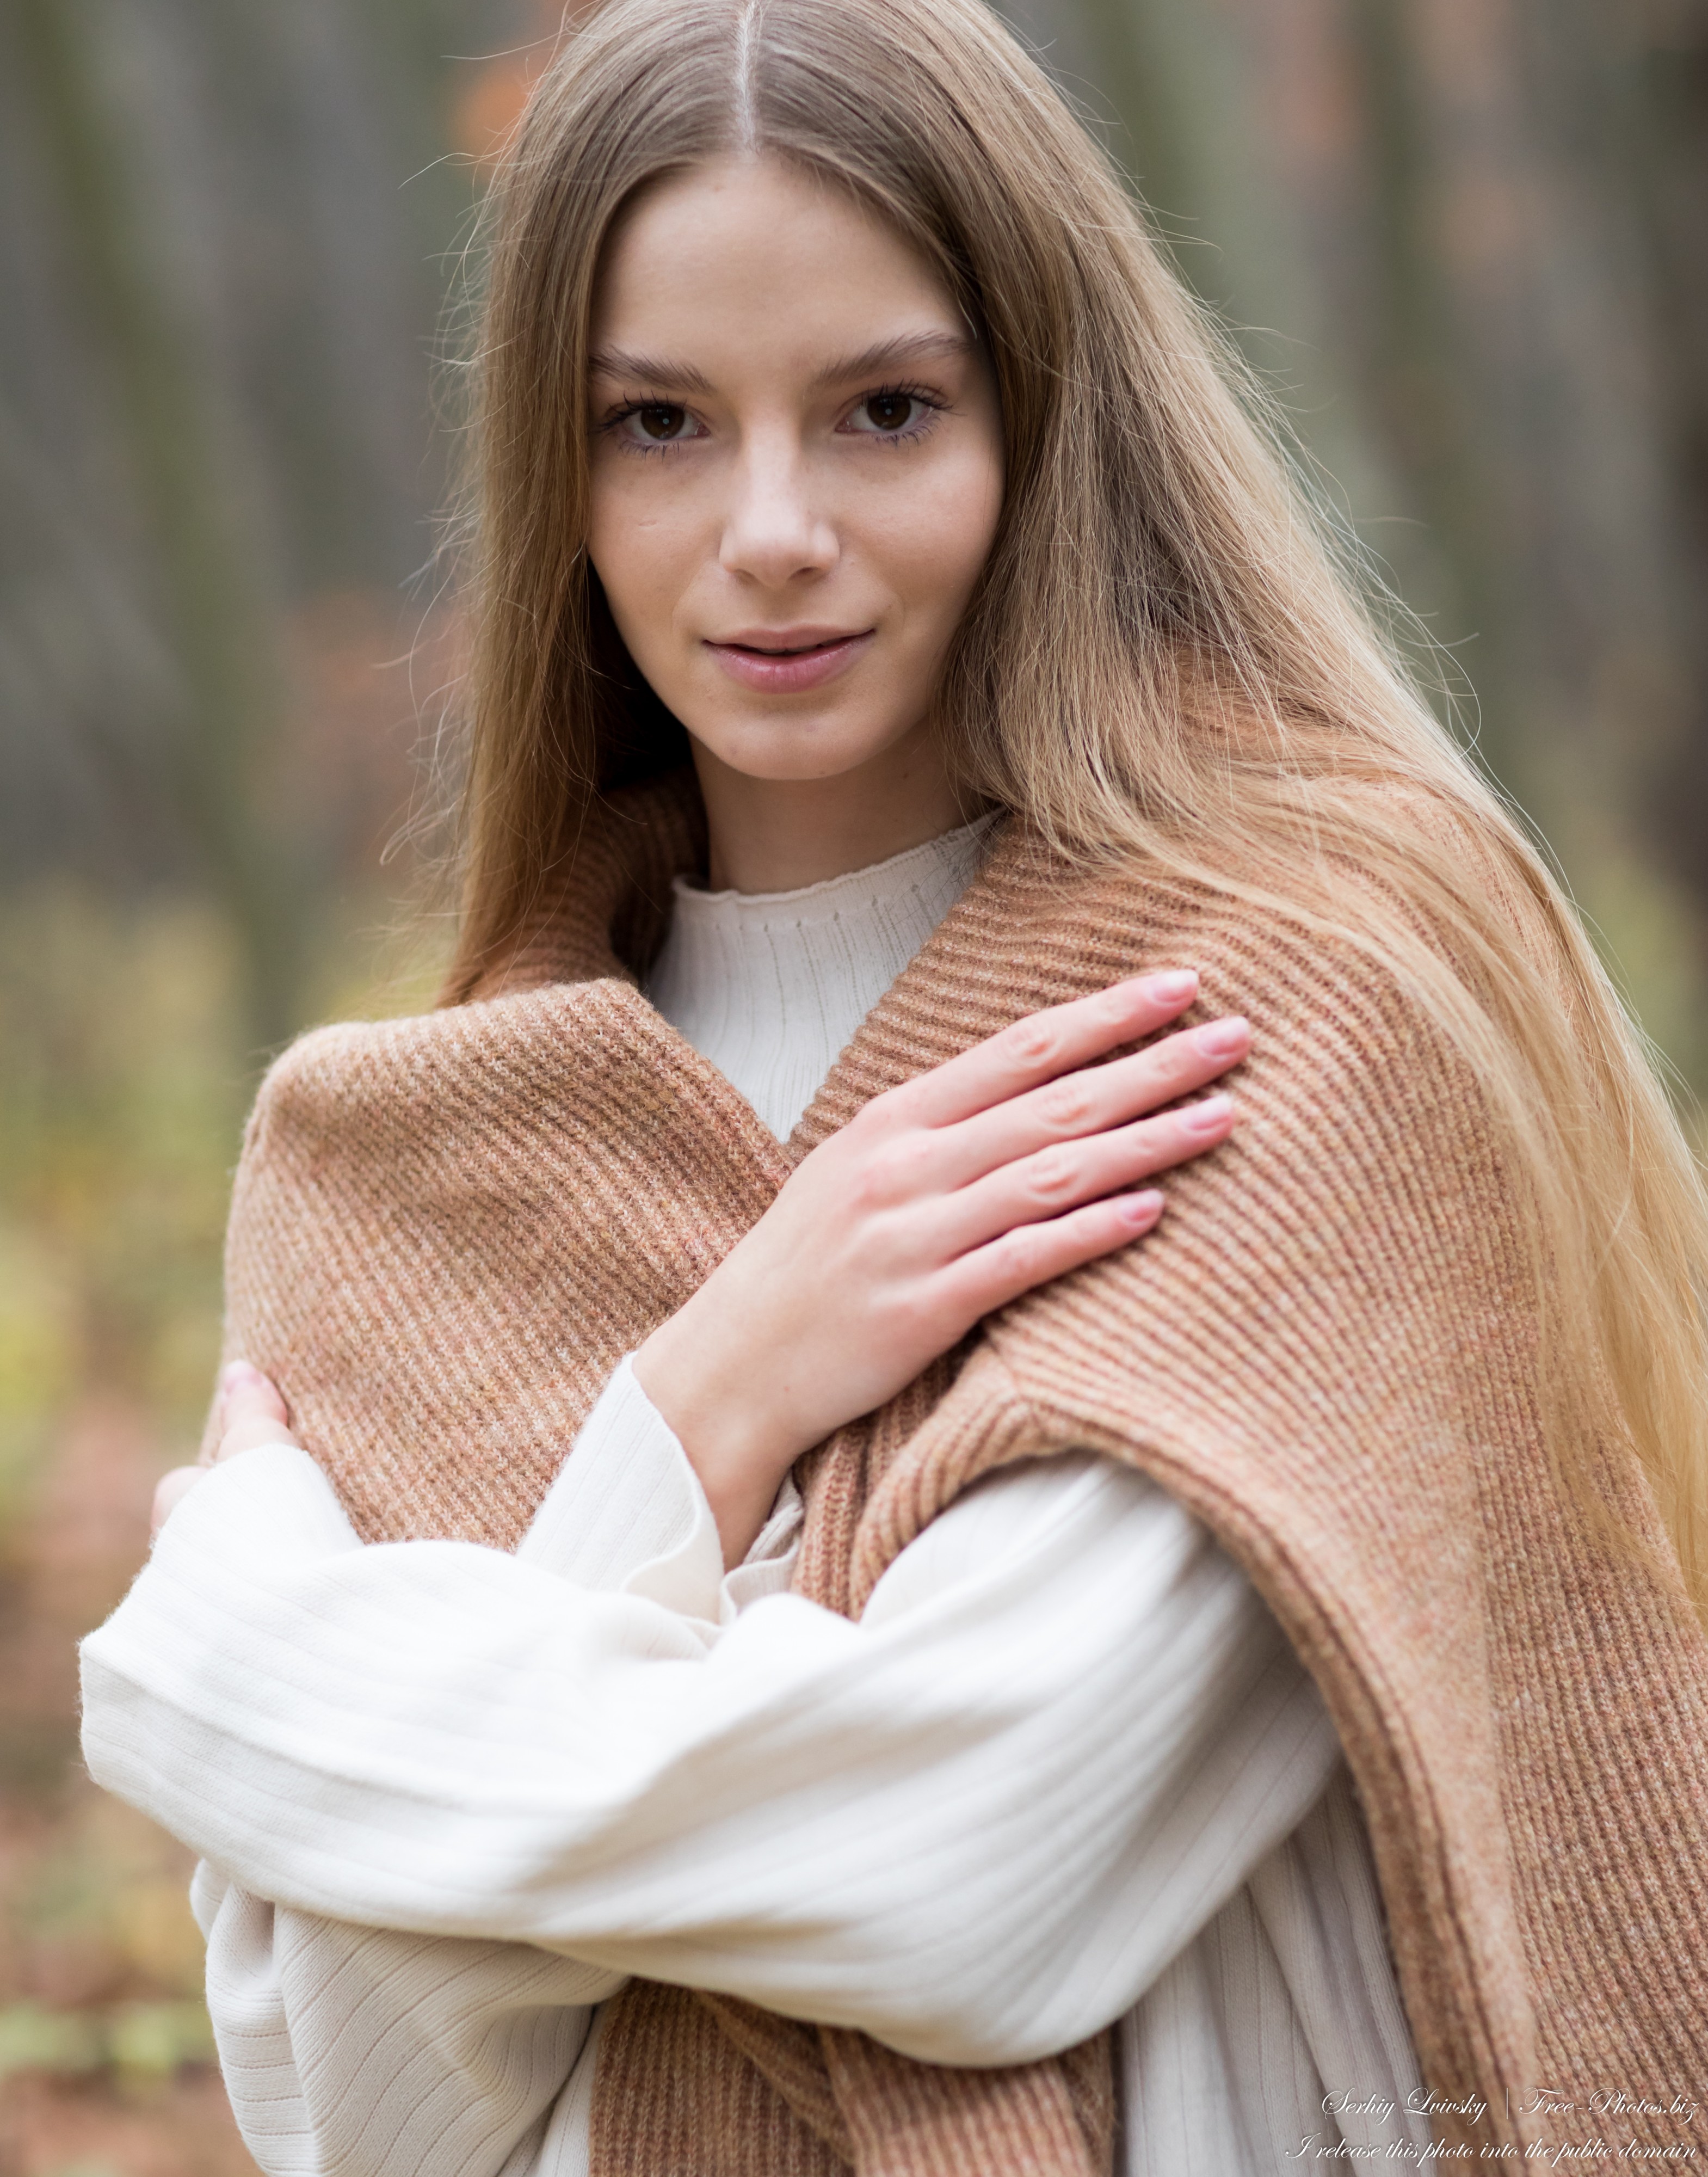 Vika - an 18-year-old God's creation with natural fair hair, photographed by Serhiy Lvivsky in November 2022, picture 24